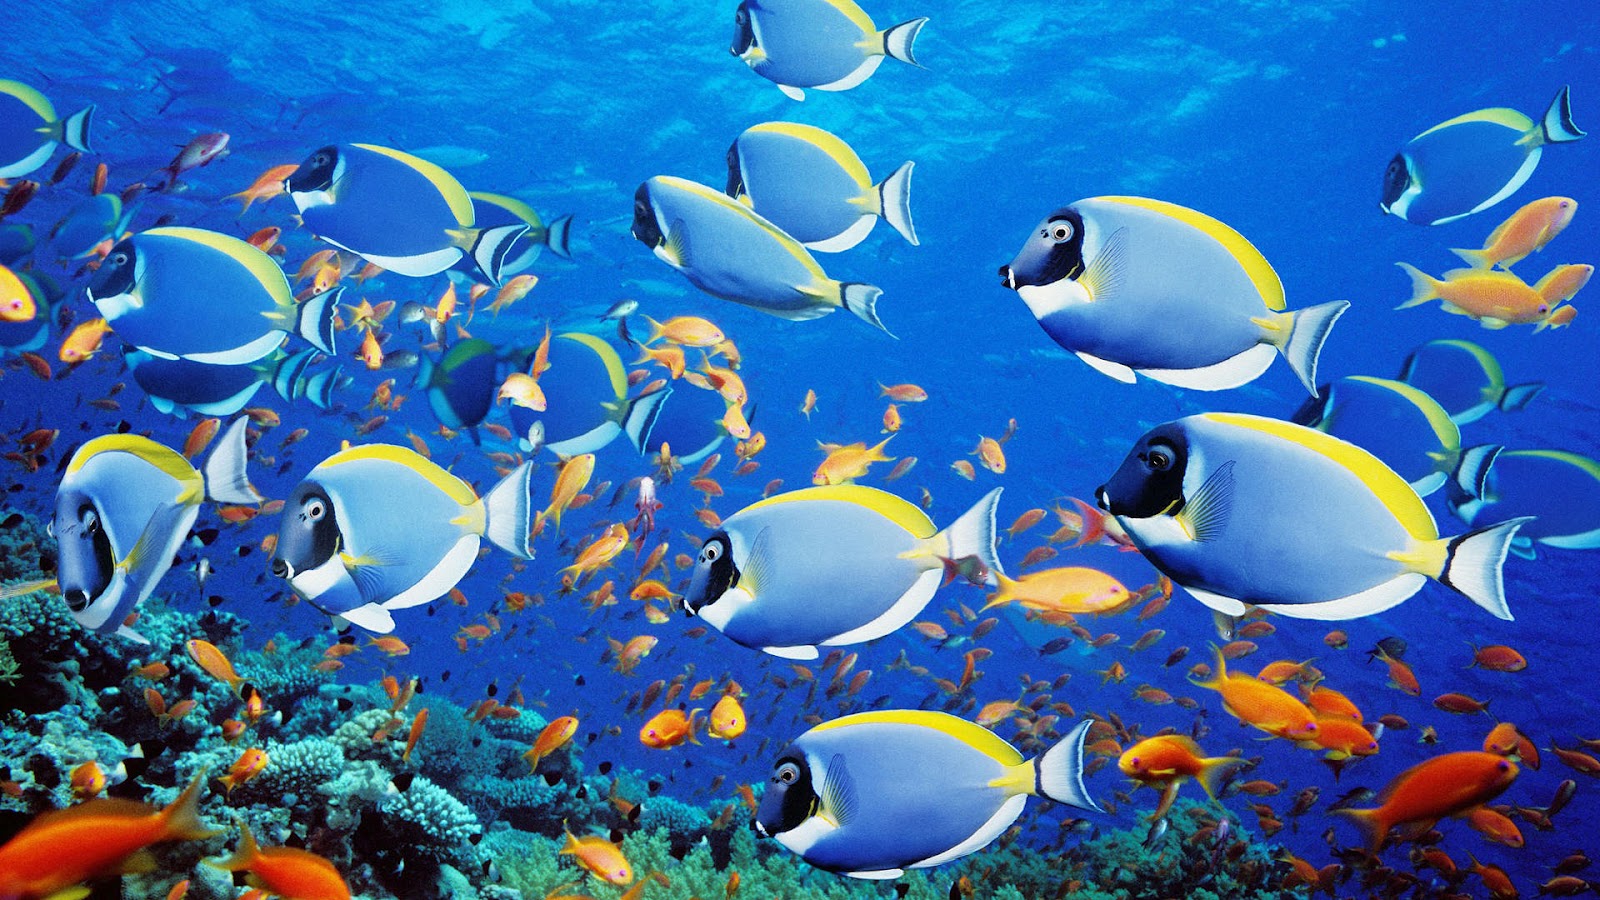 HD Animal Wallpaper Of A Group Tropical Blue Fish